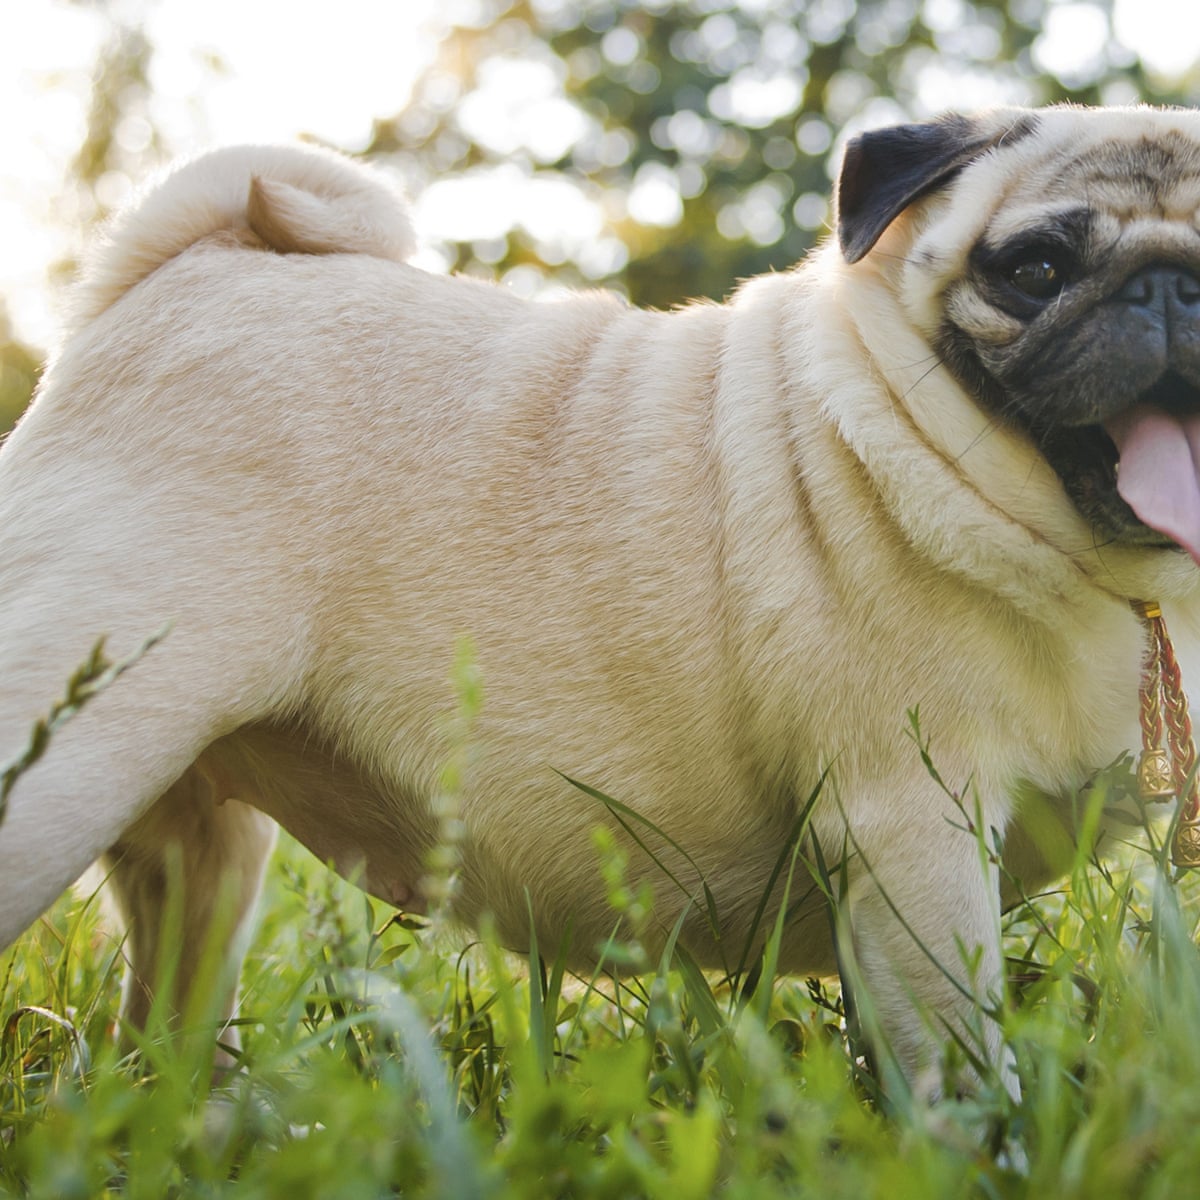 Pugs are anatomical disasters. Vets must speak out – even if it's ...